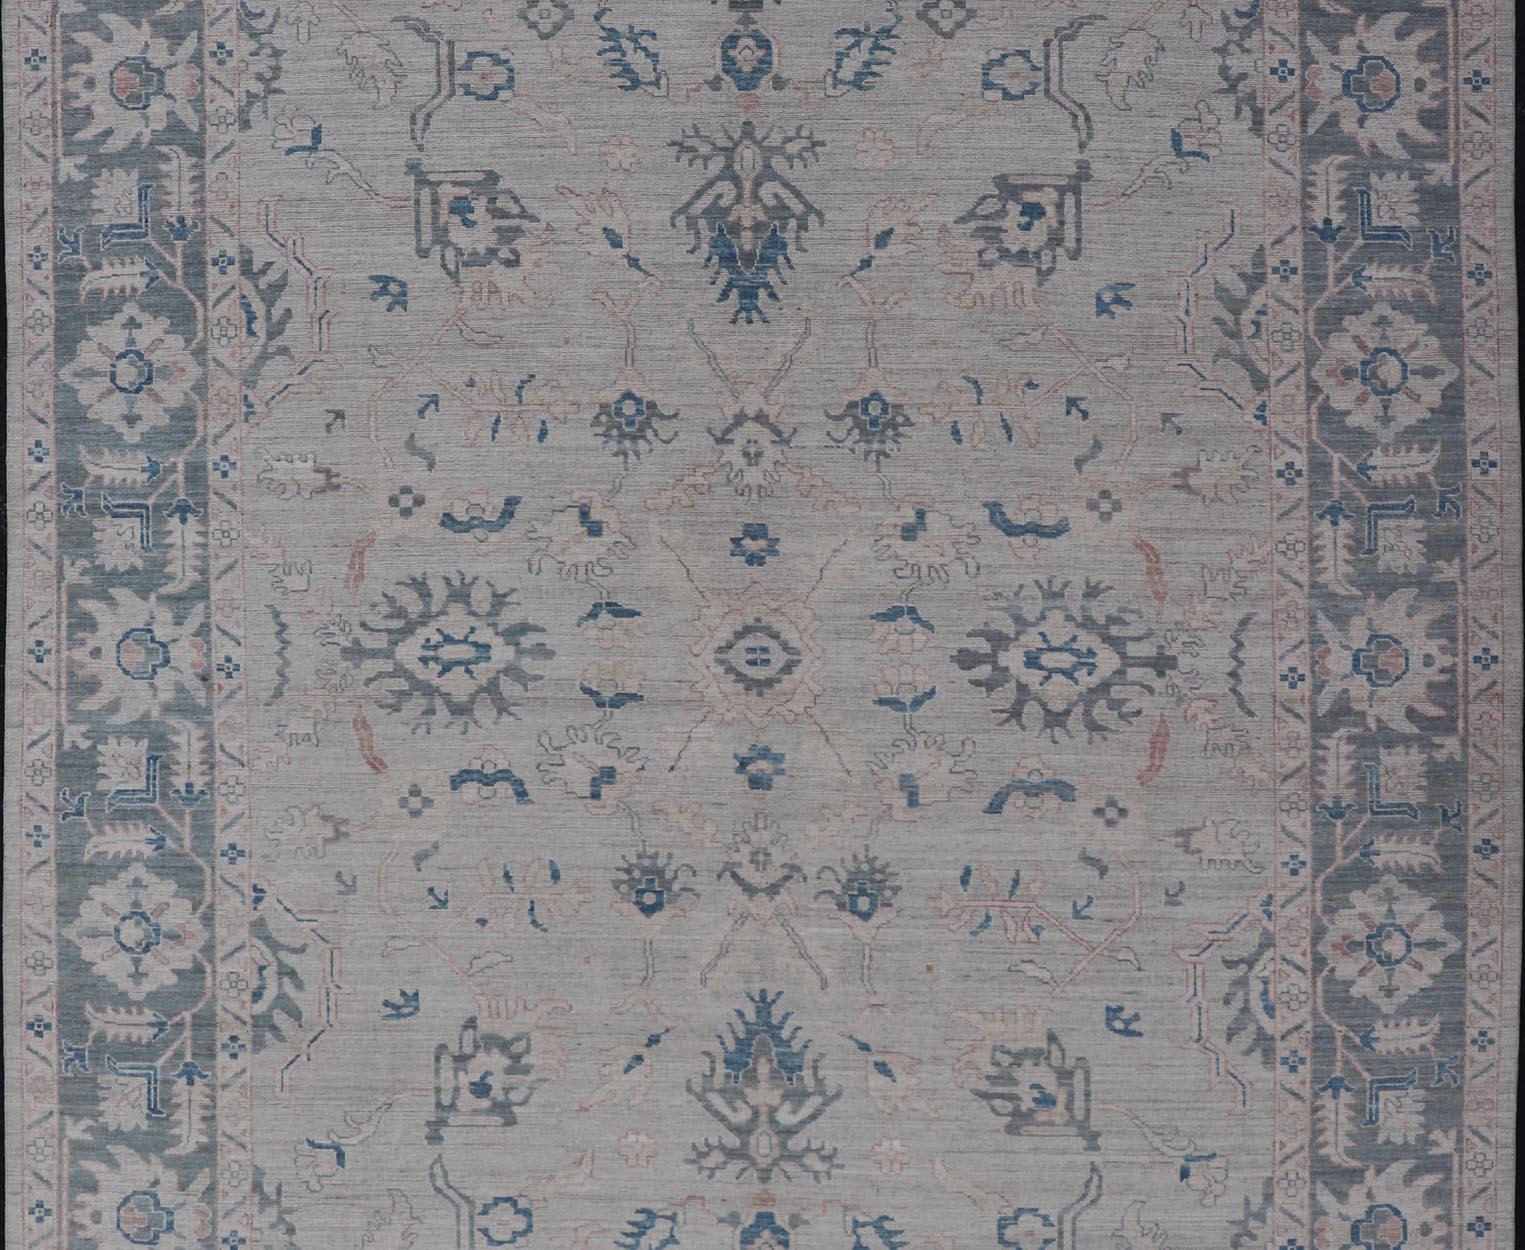  Large Modern  Oushak with Gray Colored Border and Light Silvery Gray Background. Country of Origin: Afghanistan; Type: Oushak; Design: Medallion, Tribal Medallion, All-Over; Keivan Woven Arts: rug AWR-8521. 

Measures: 9'10 x 13'10

A modern Oushak